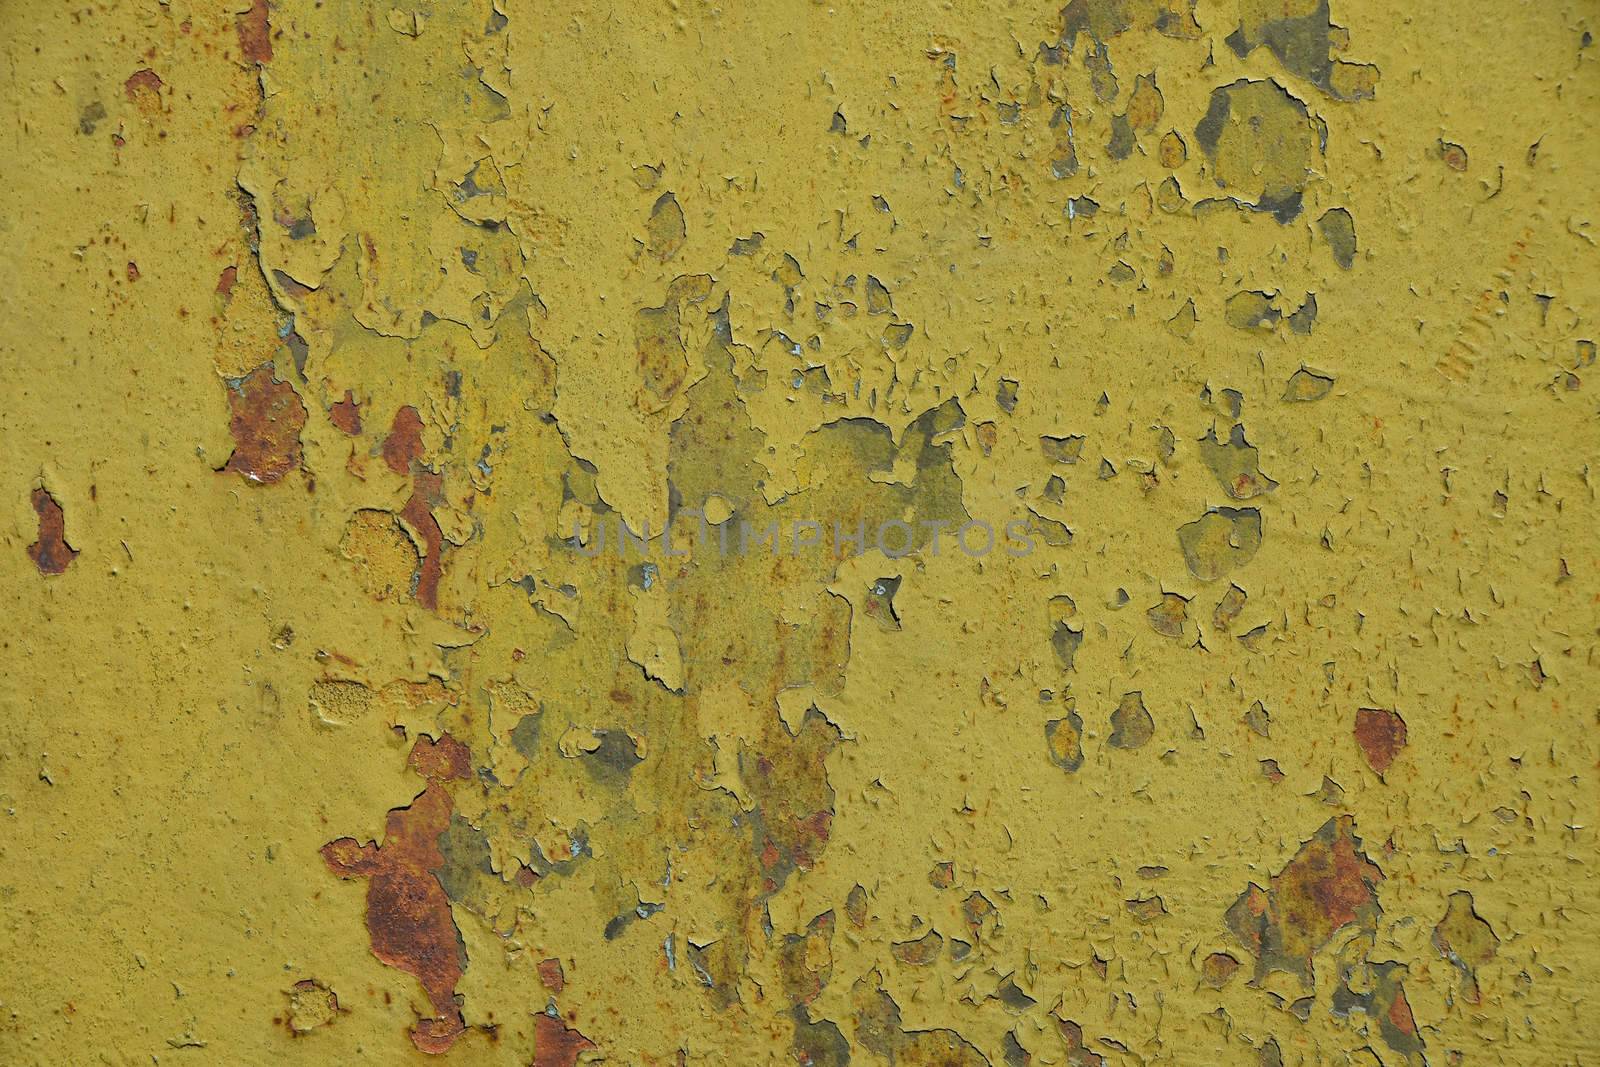 Stained corroded rusty yellow khaki painted metal surface with flakes and scratches